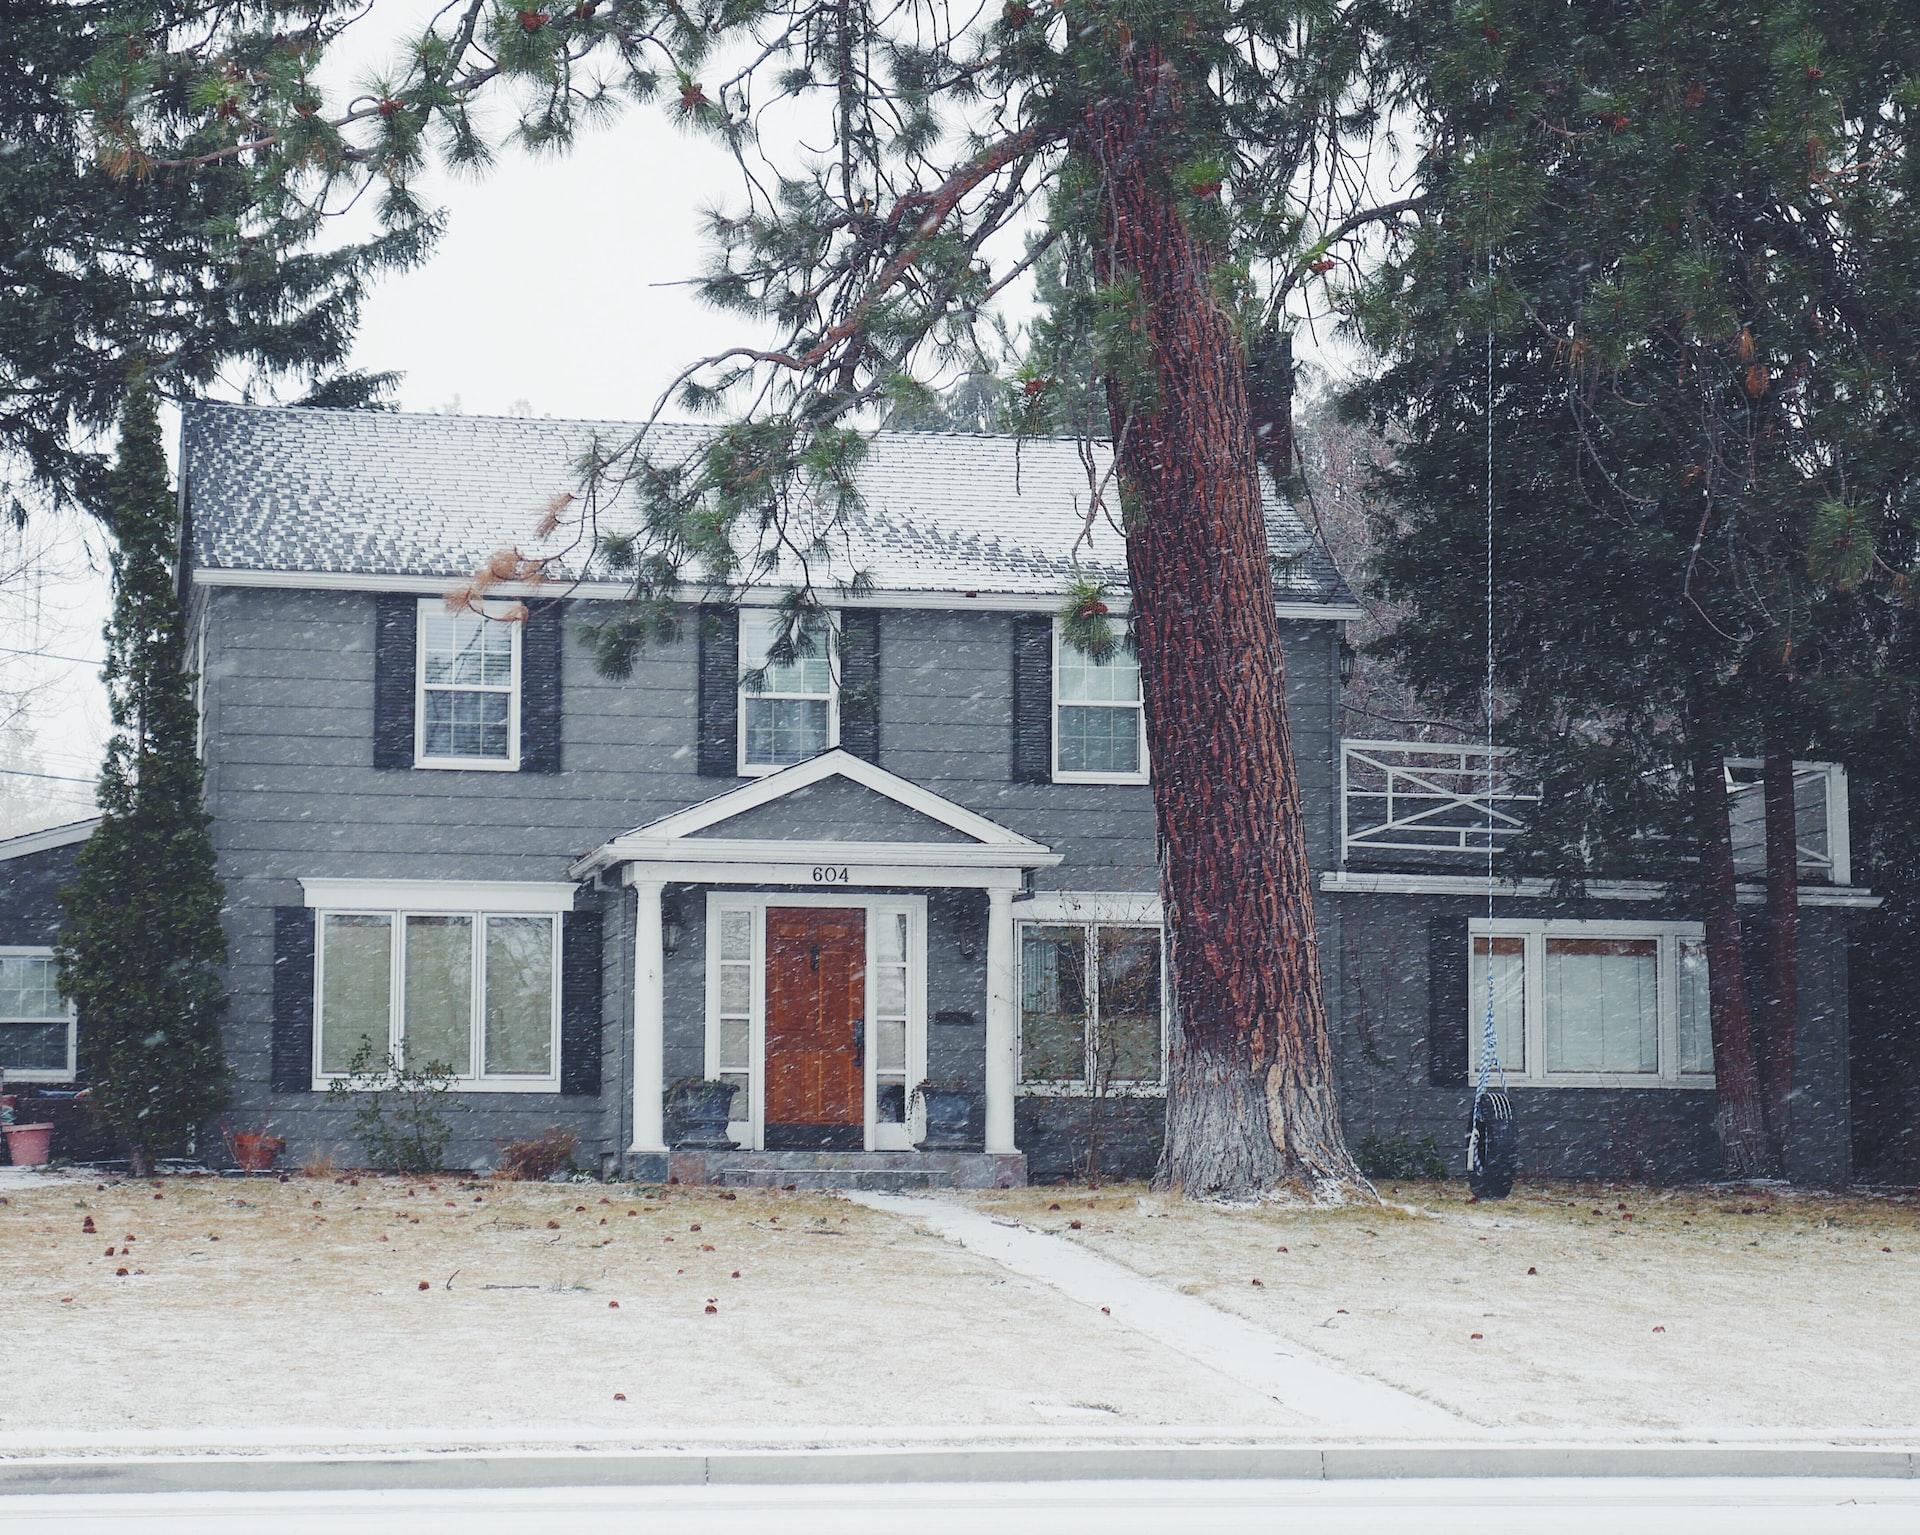 A gray house with a tree in front of it, ready for winter.